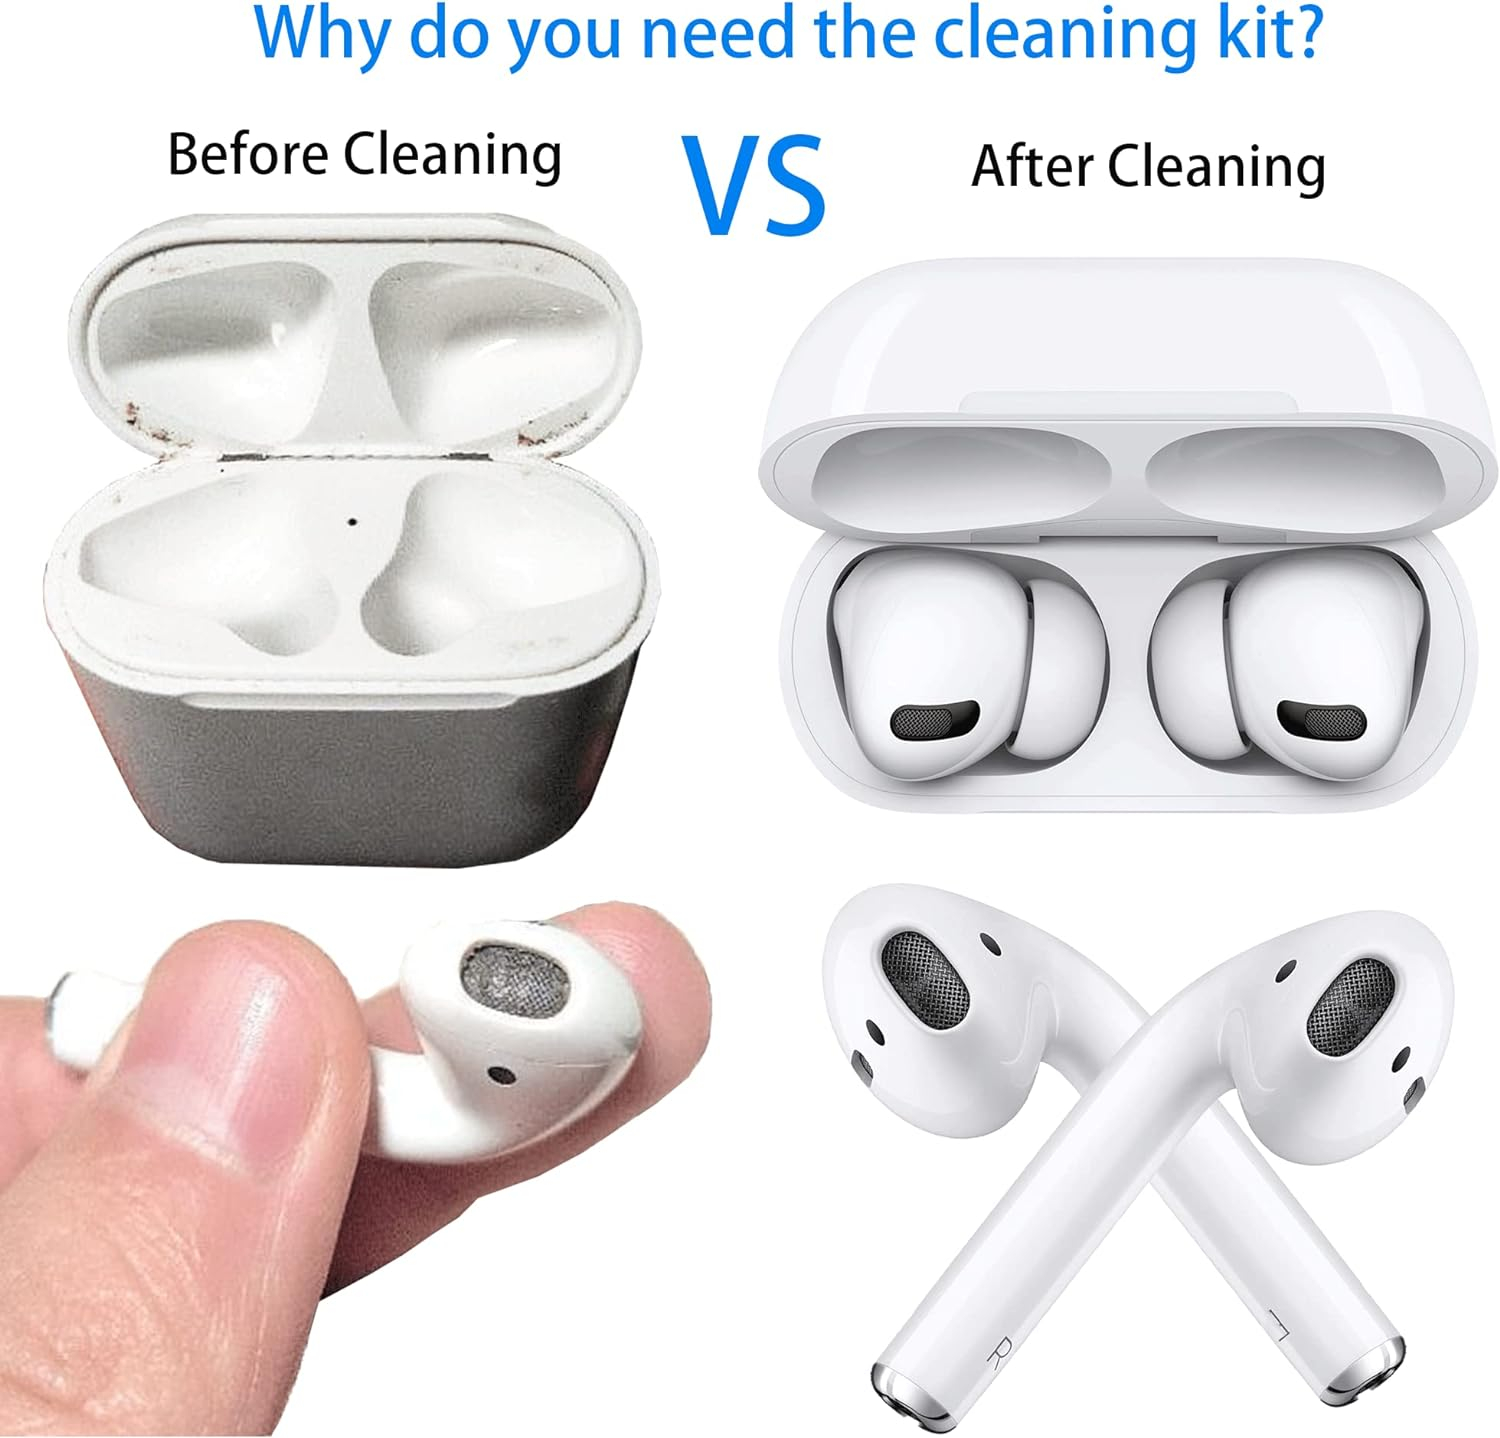 Cleaner Kit Compatible with Airpod Pro 1st 2nd 3rd Generation, Airpods Cleaning Kit and Keyboard Brush Gen 3 2 1, Pen Ear Bud Cleaning Tool for Samsung Galaxy Earbuds, Beats, Laptop, Phone, (White)